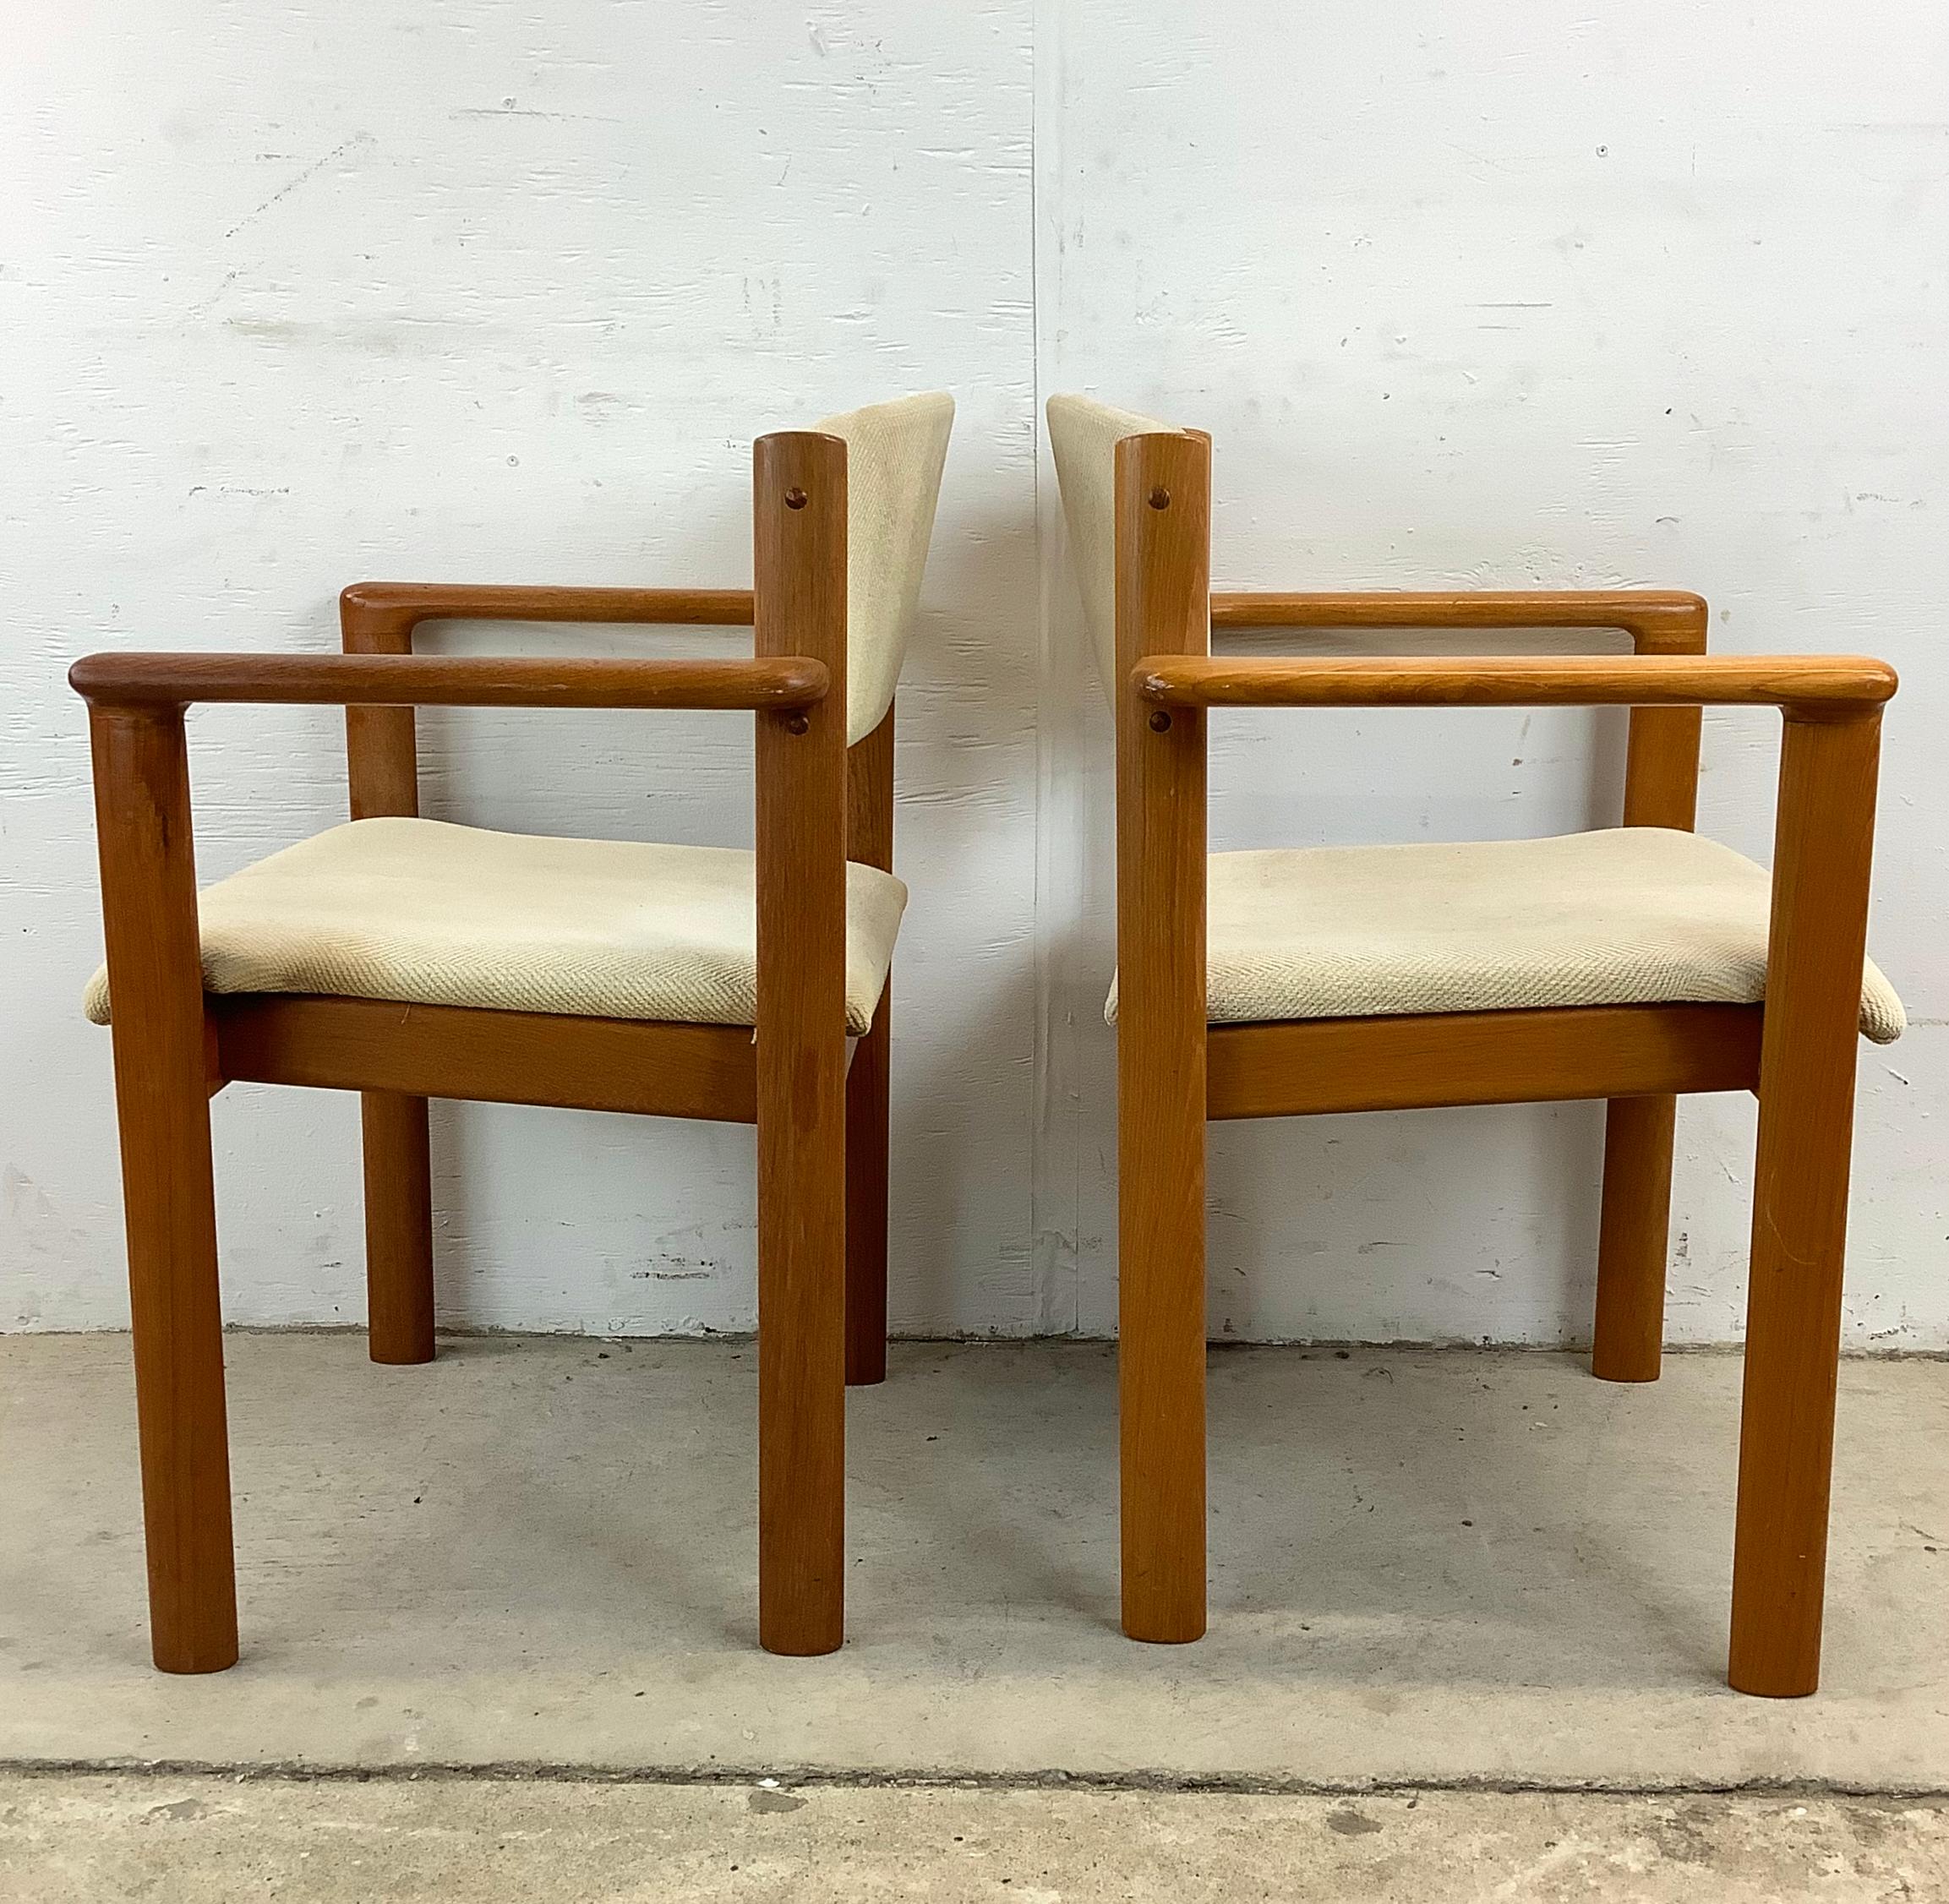 Other Pair Vintage Teak Armchairs For Sale